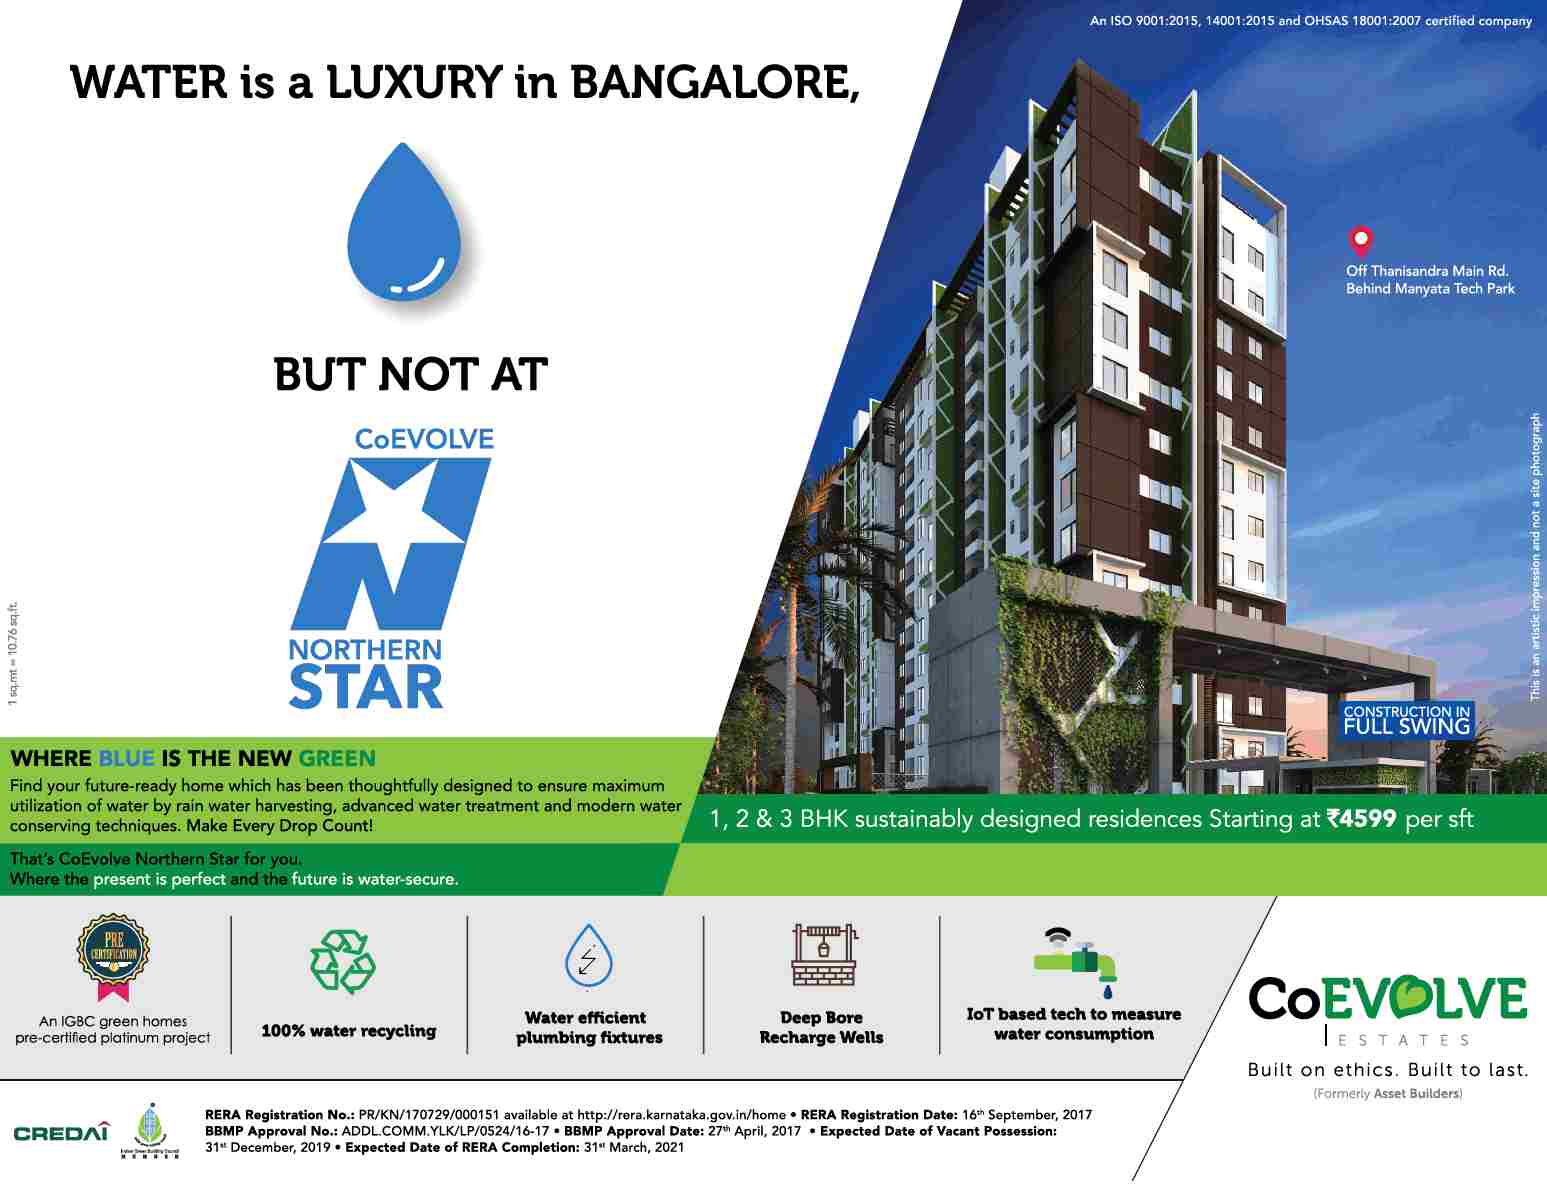 Book sustainably designed residences starting @ 4599 per sqft at CoEvolve Northern Star in Bangalore